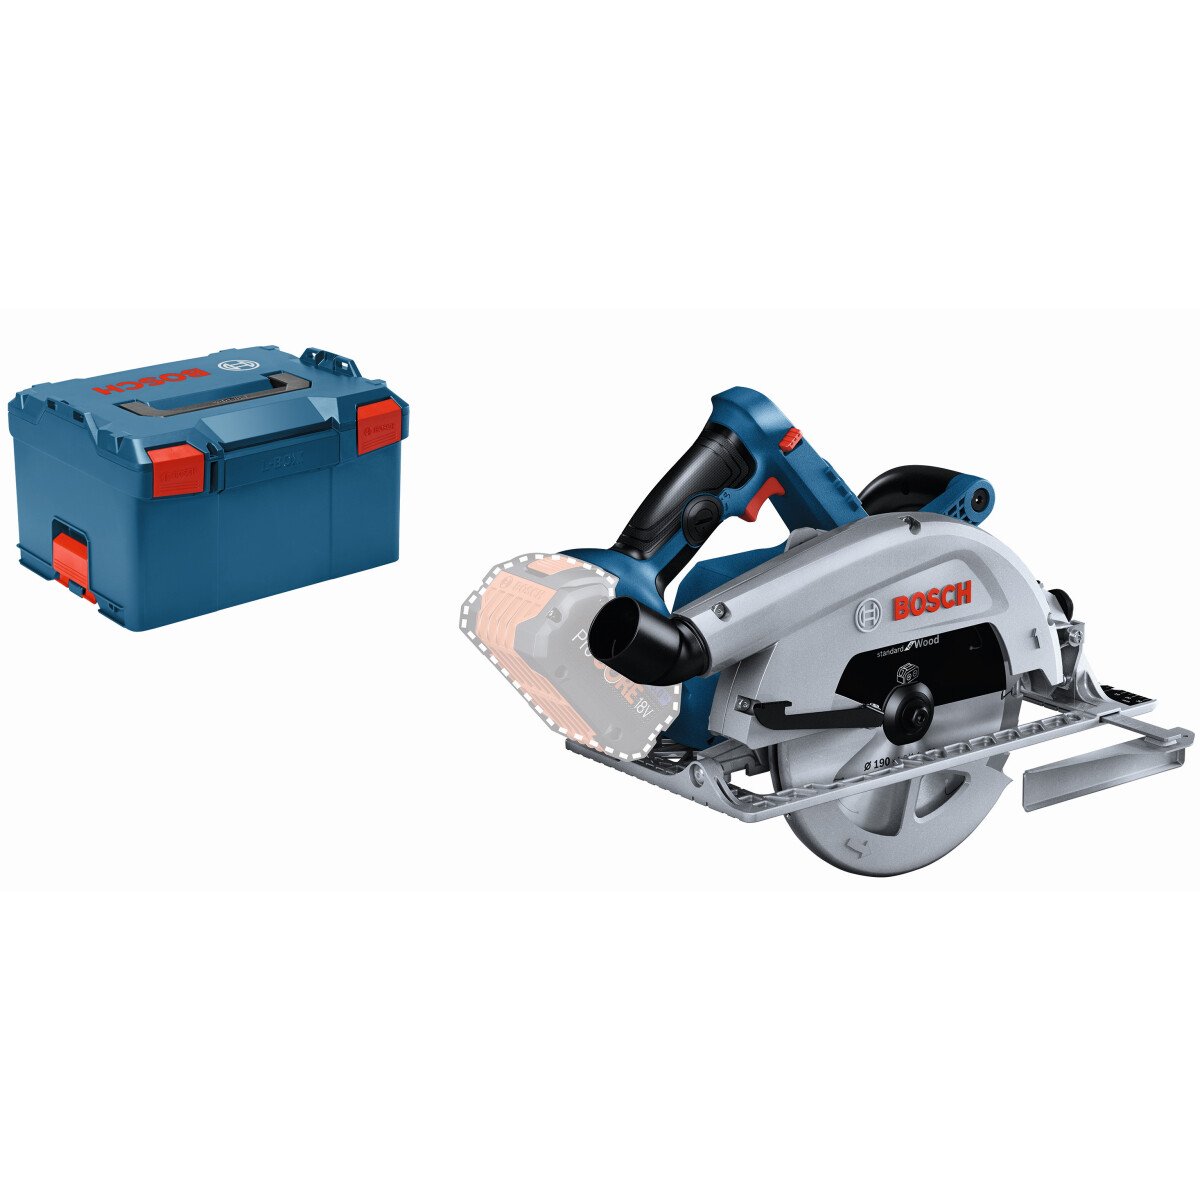 Bosch GKS18V-68CNCG Body Only 18V BITURBO Brushless Connection Ready 190mm Circular Saw in L-BOXX